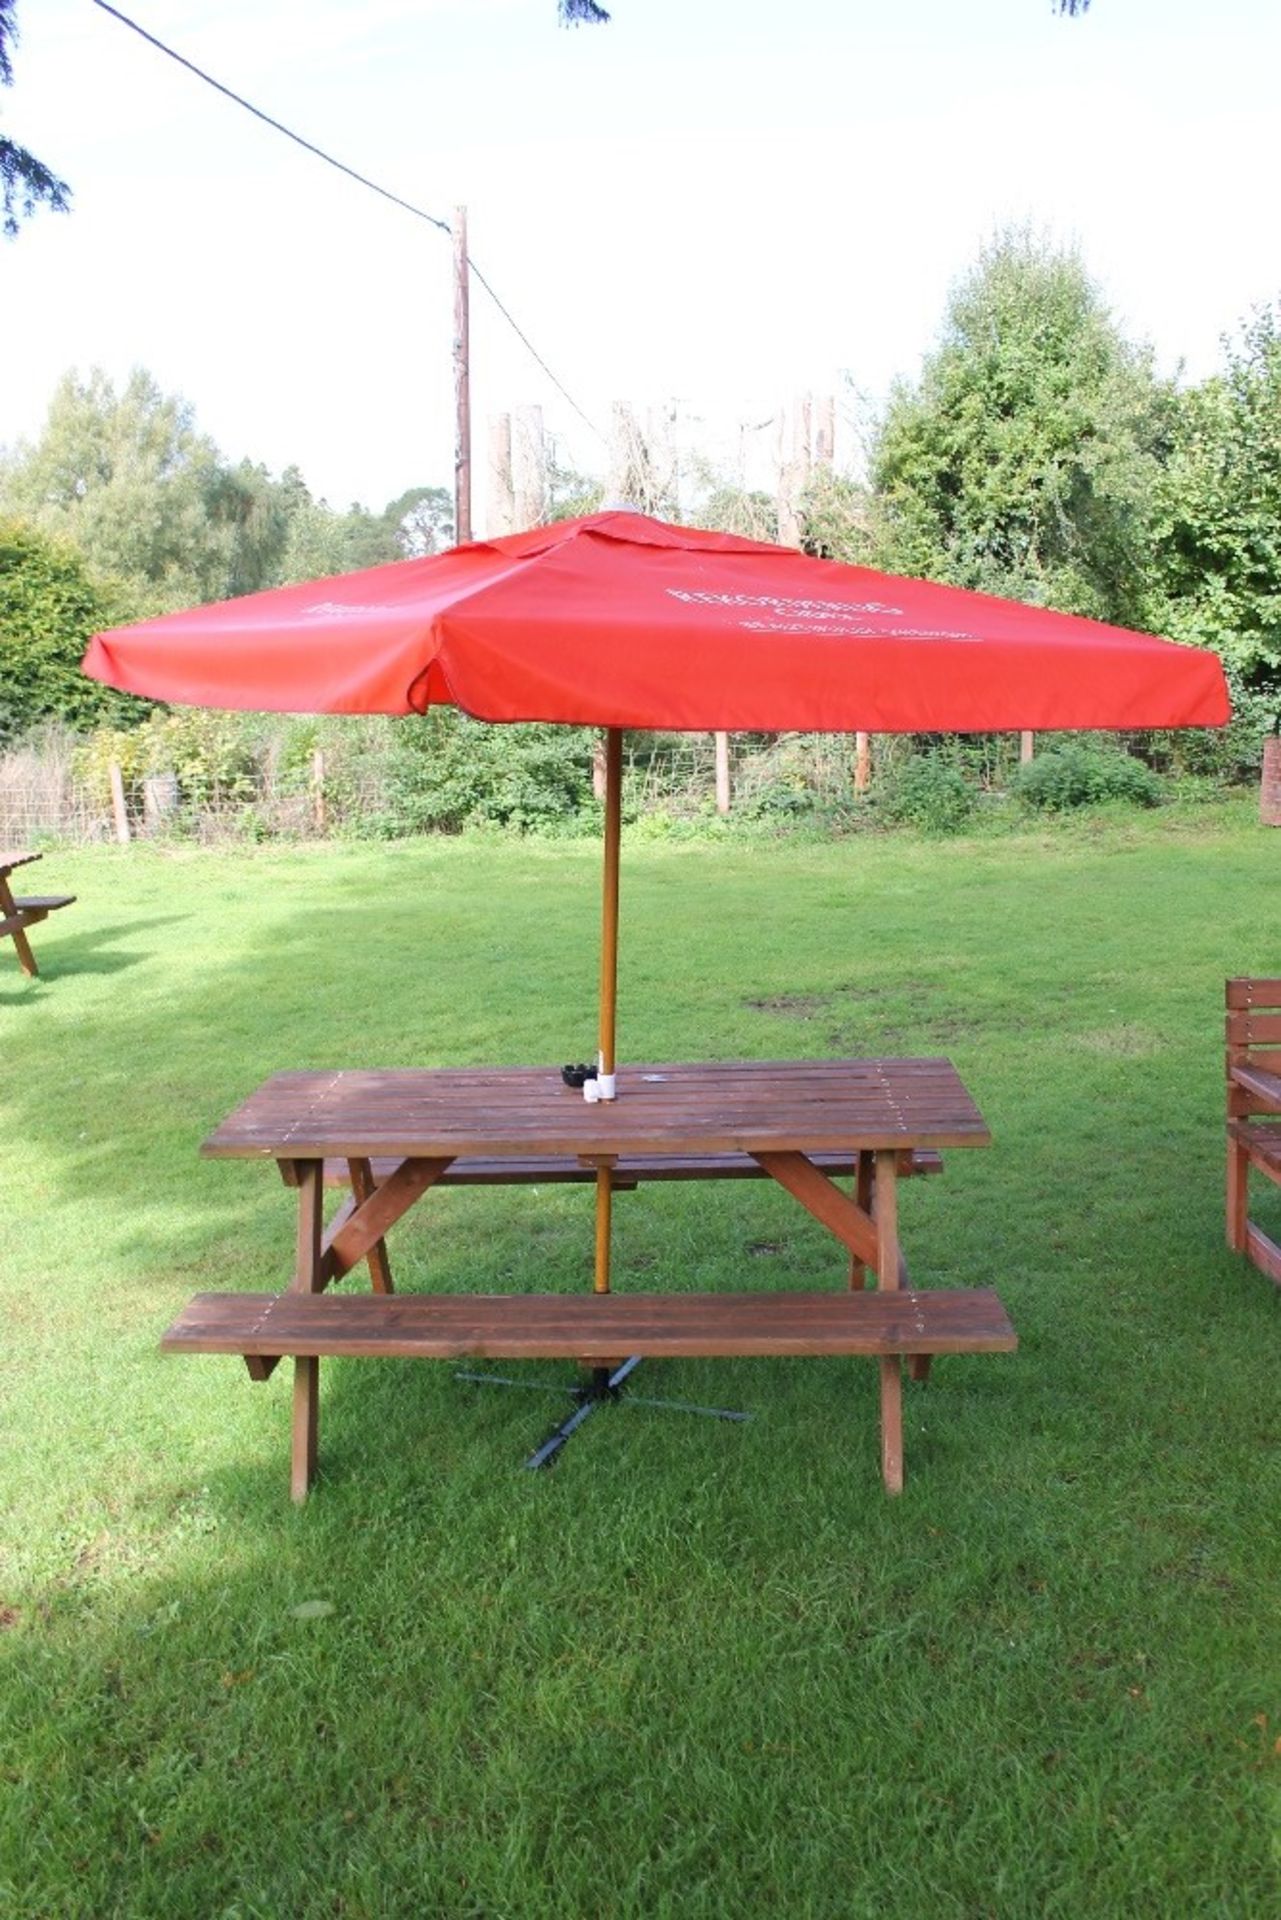 Beer Garden Furniture – Natural Wood – 8 Seater Bench Table + Parasol Buyer to collect from Powys